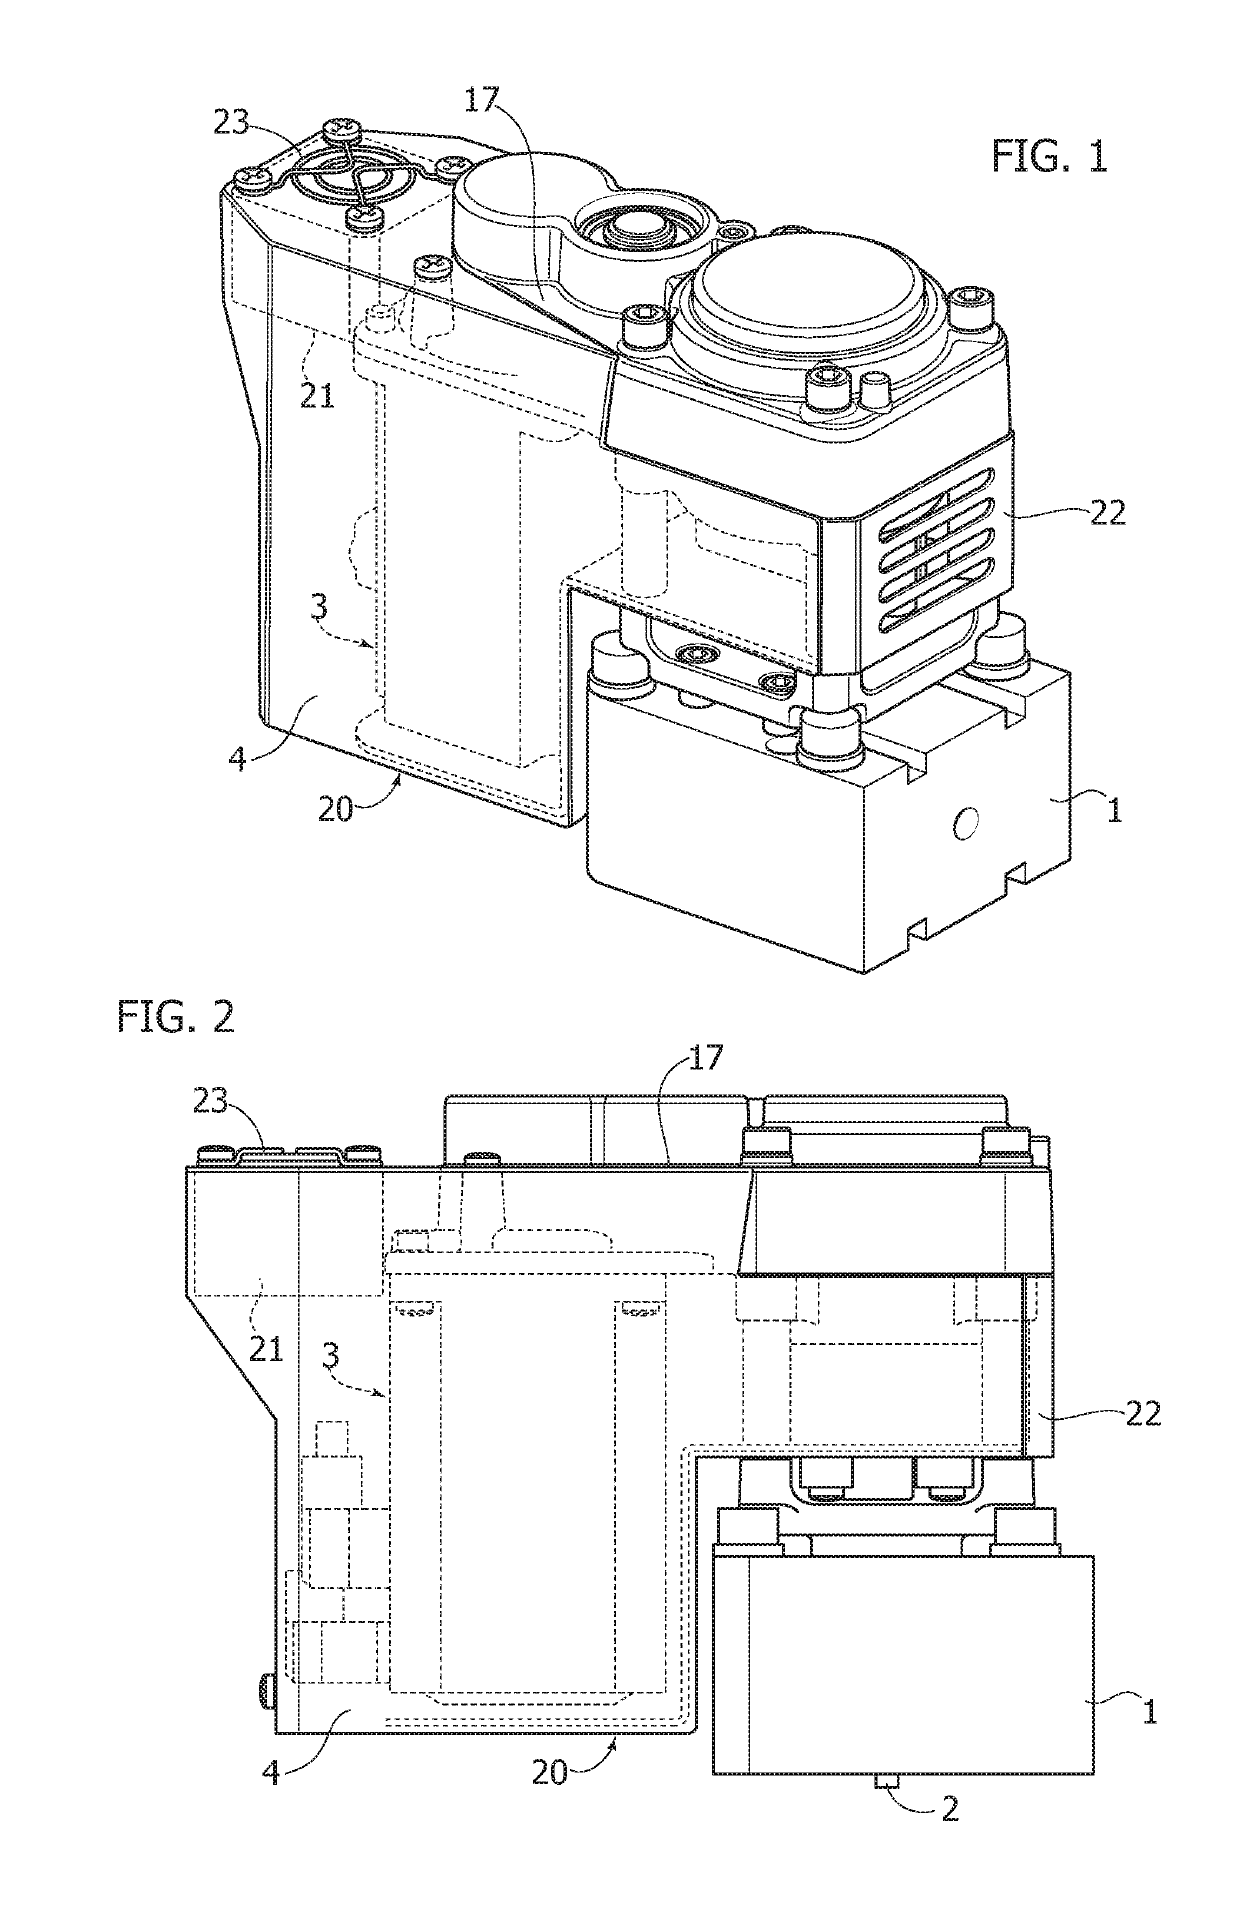 Apparatus for injection molding of plastic materials